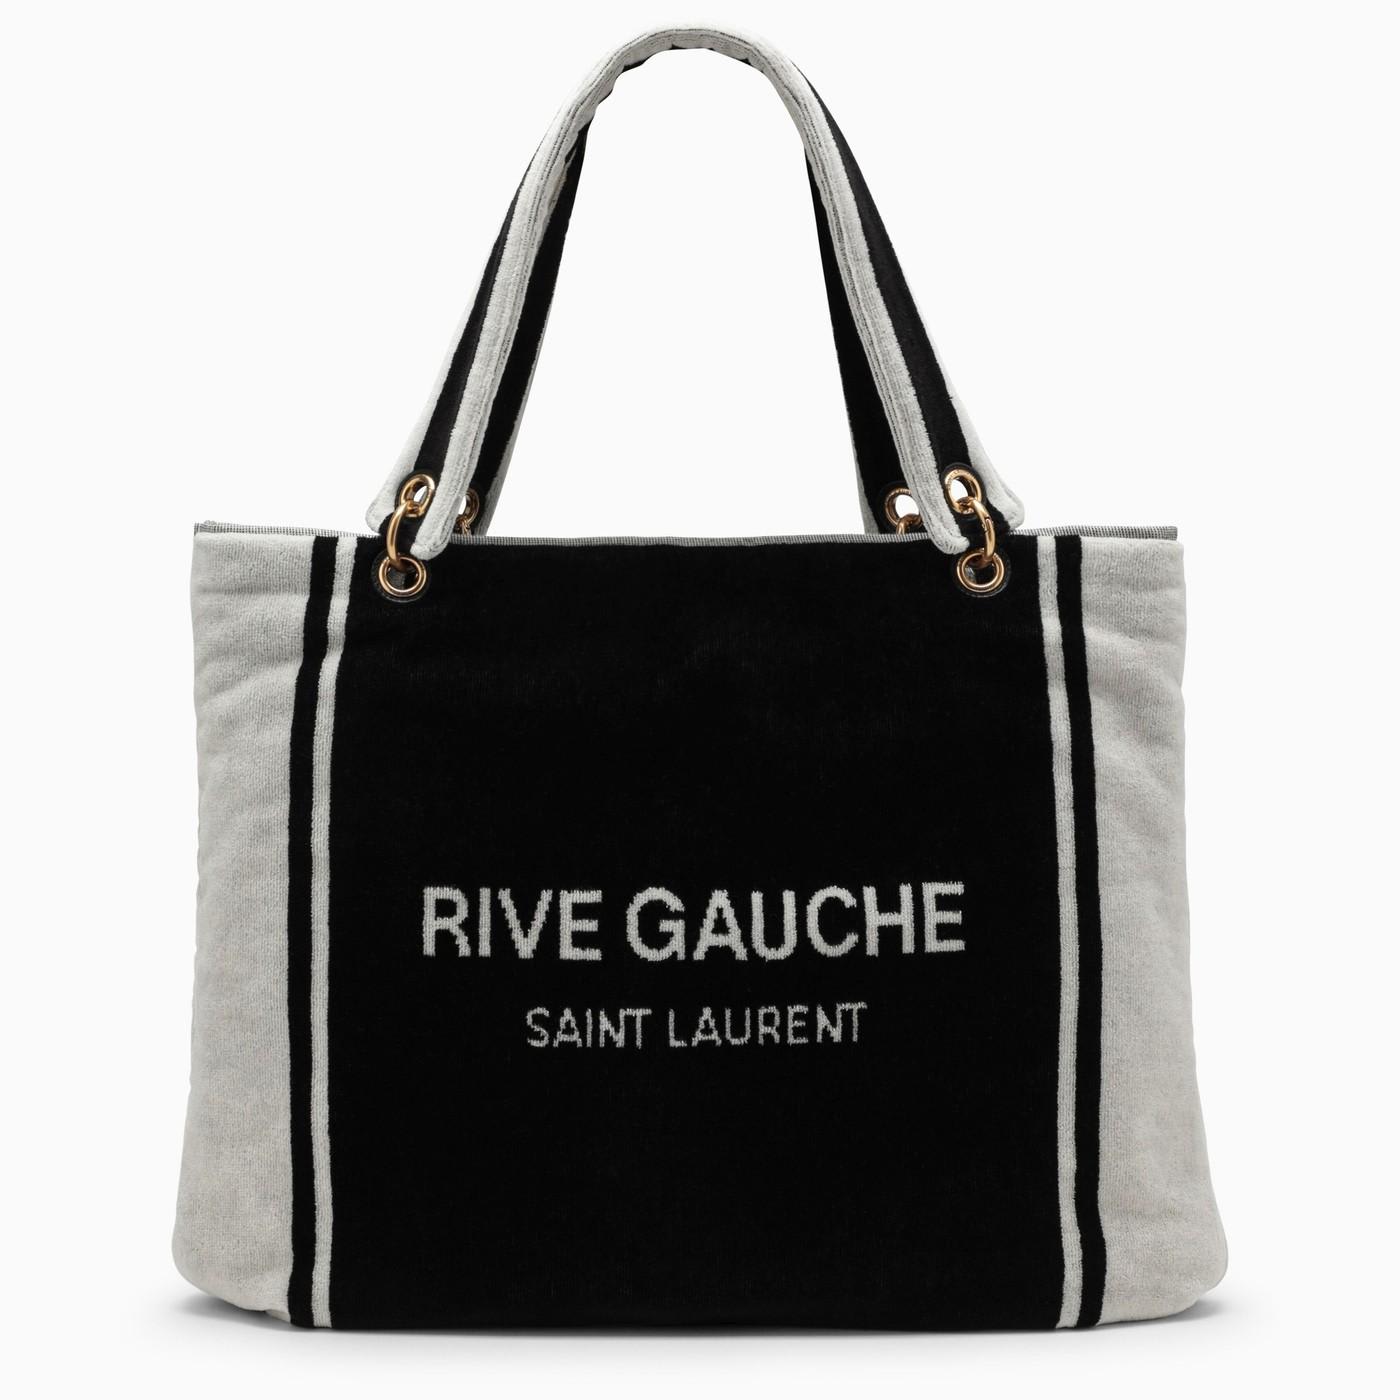 Shop Saint Laurent Rive Gauche Tote In Black And White Terry Cloth